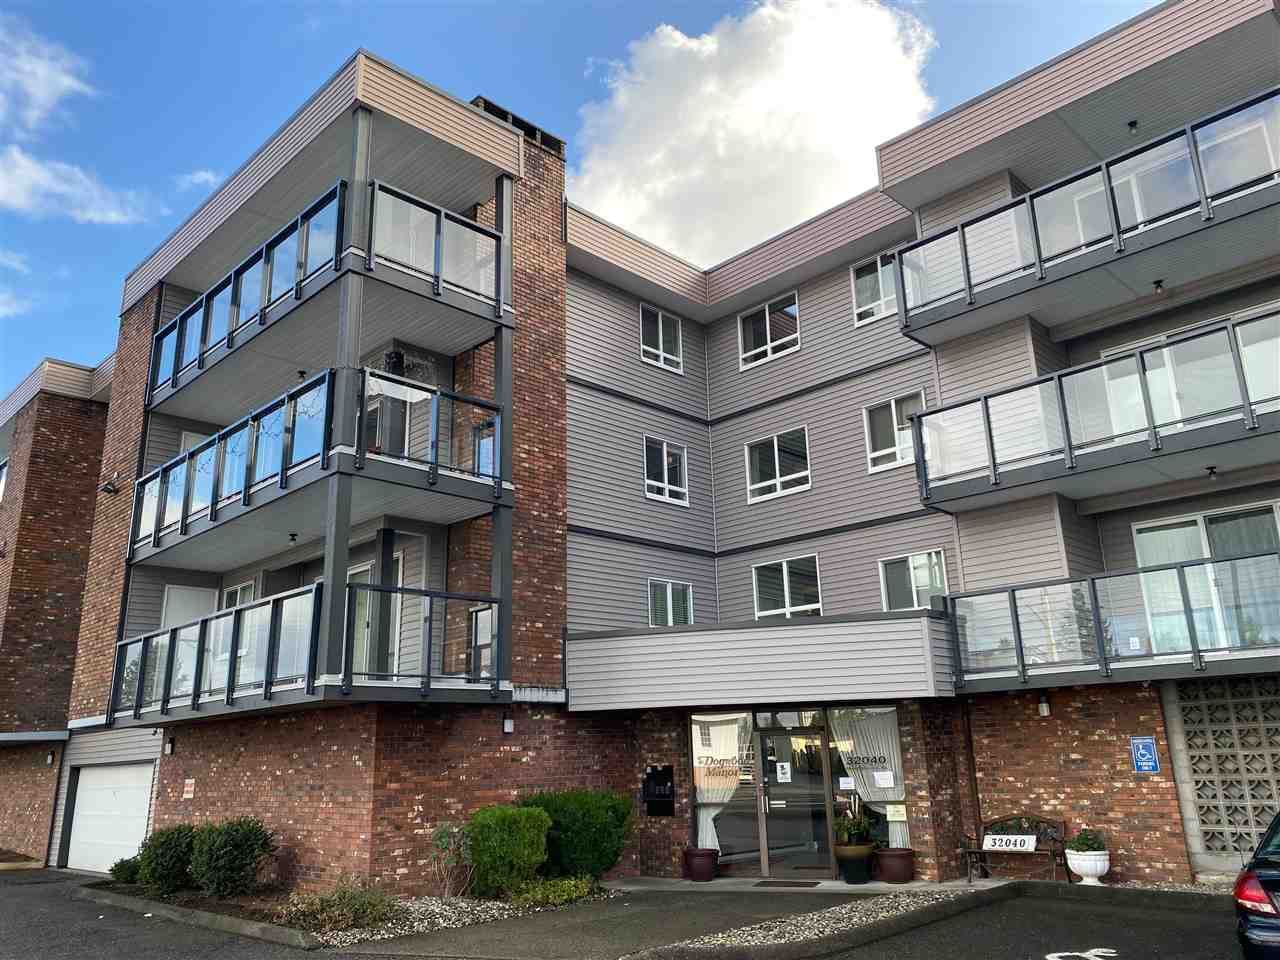 Main Photo: 307 32040 PEARDONVILLE ROAD in Abbotsford: Abbotsford West Condo for sale : MLS®# R2526573